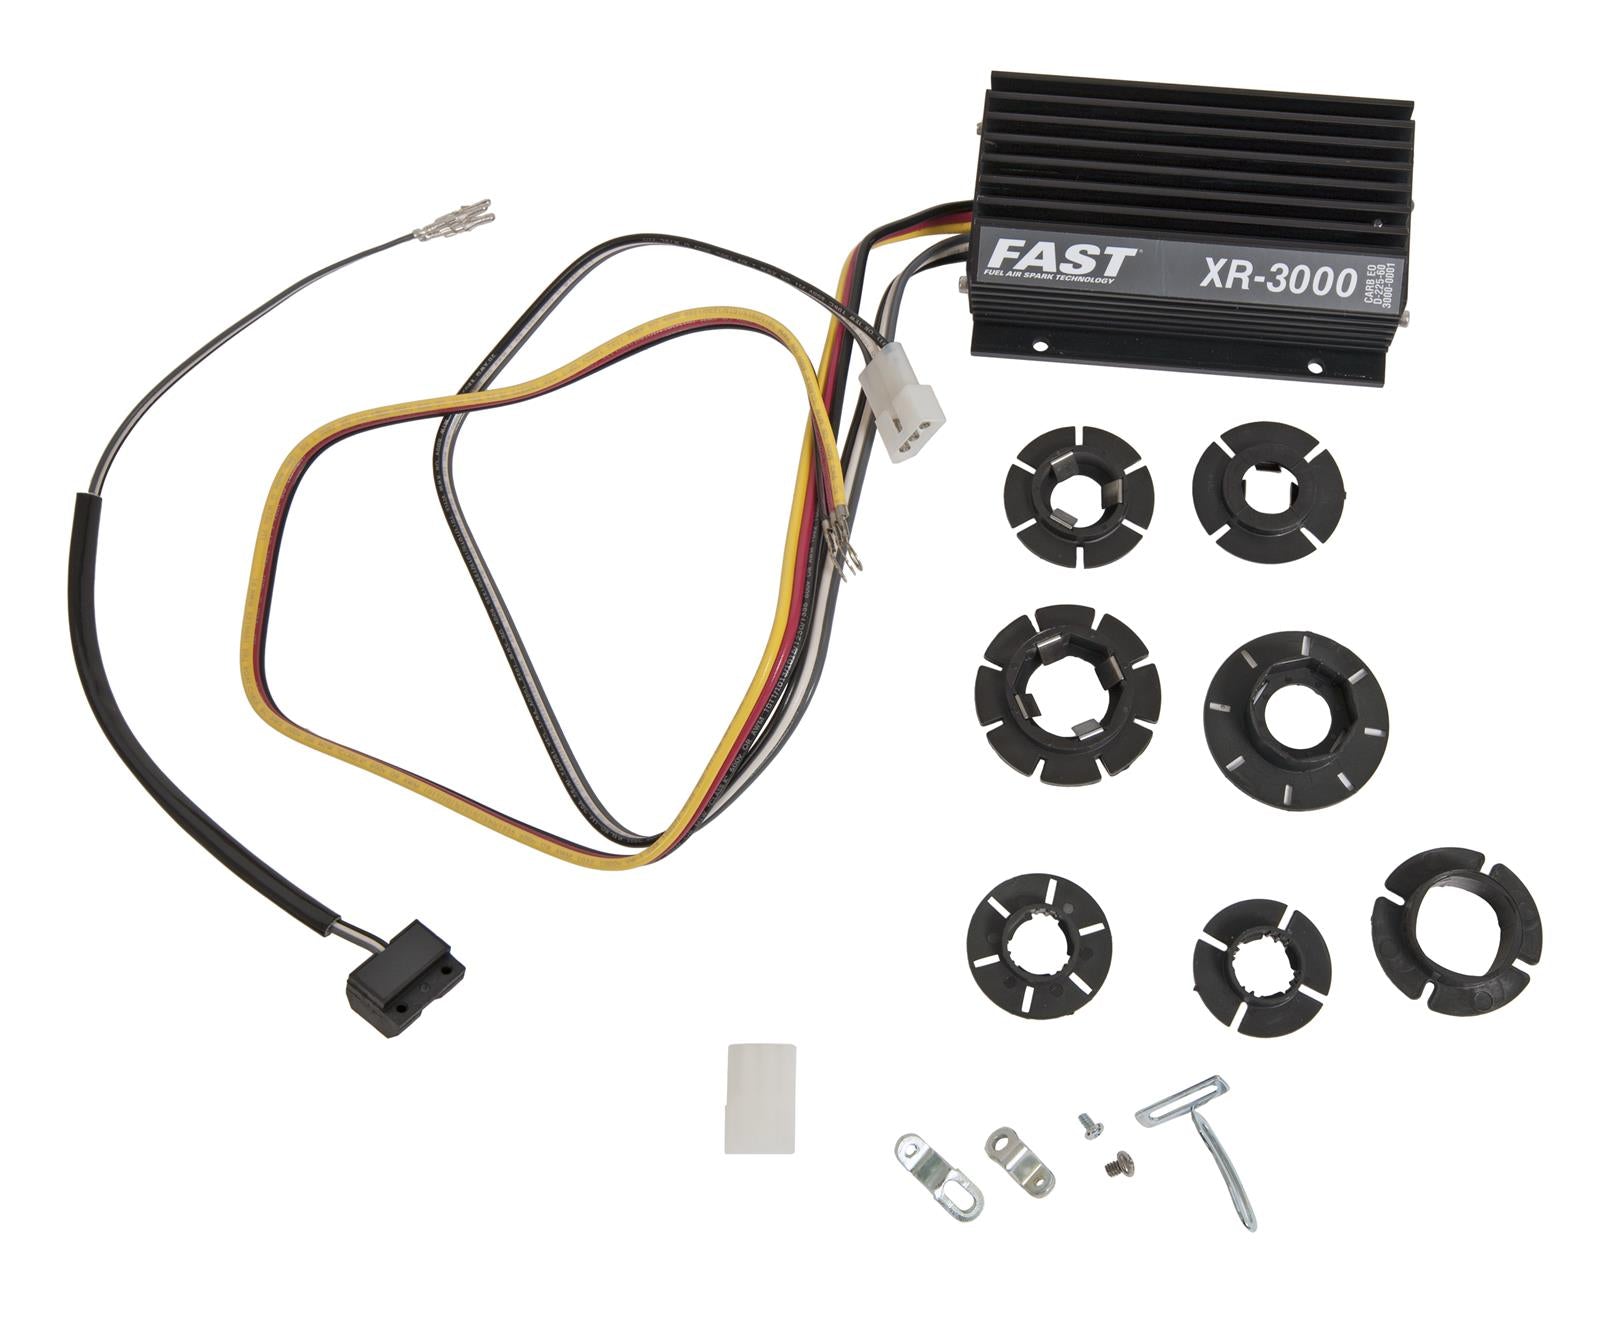 FAST XR3000 Points-To-Electronic Ignition Conversion Kit For Universal 4, 6 And 8 Cylinder Applications